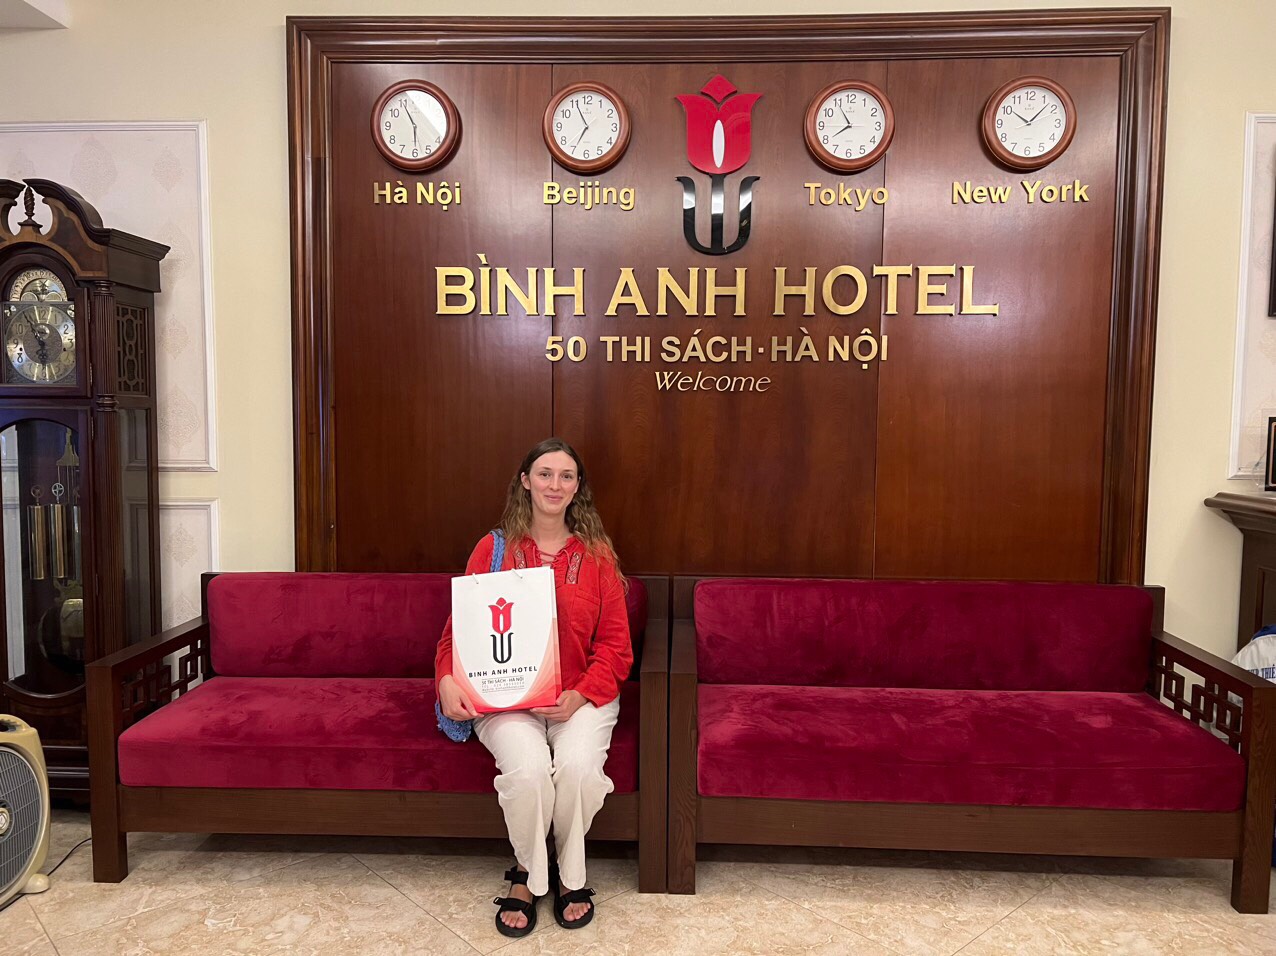 <p>I'm REICHERT ANIKA from German. I booked 1 room at Binh Anh Hotel on Agoda. The rooms was beautiful, clean, attentive services! I traveled to Ha Giang province, then came back to Binh Anh Hotel</p>
